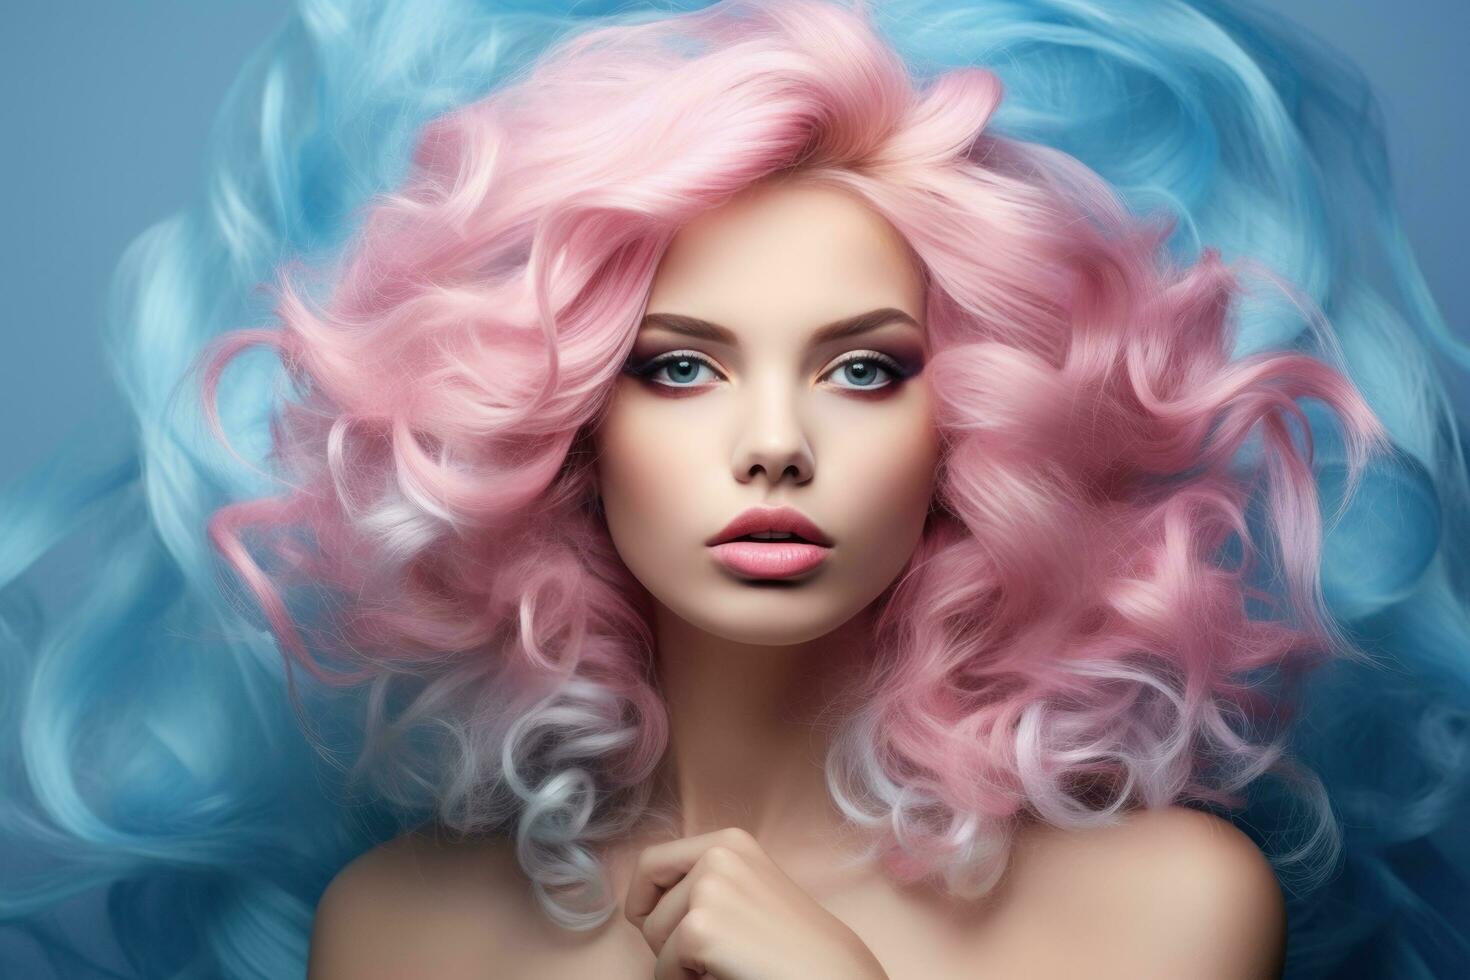 Model girl with pink hair photo